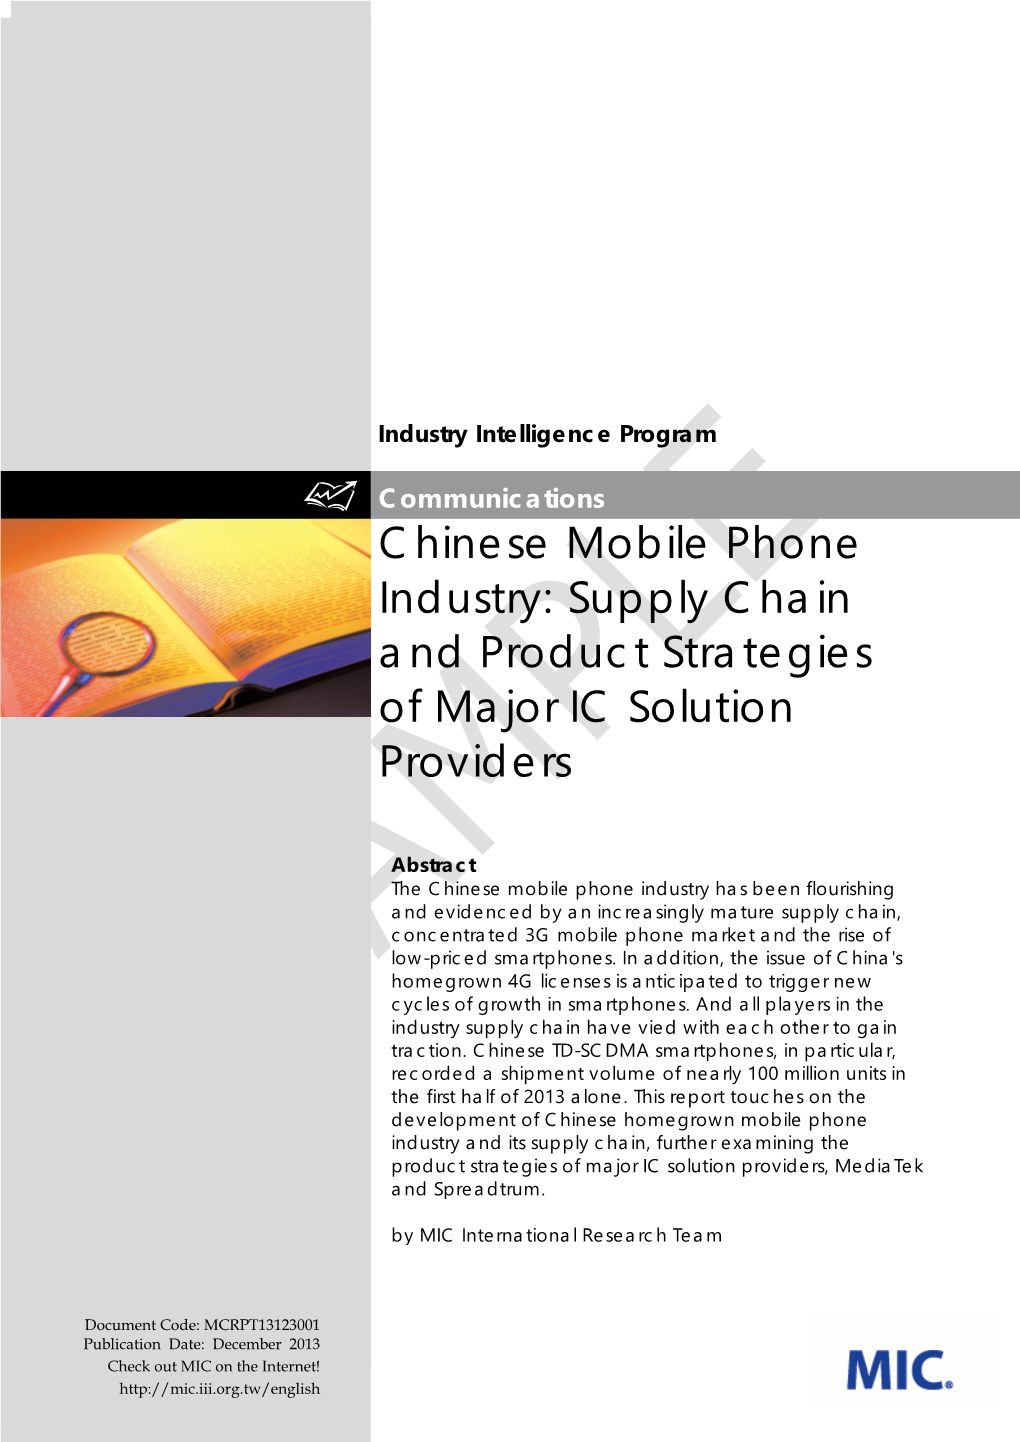 Chinese Mobile Phone Industry: Supply Chain and Product Strategies of Major IC Solution Providers ______I